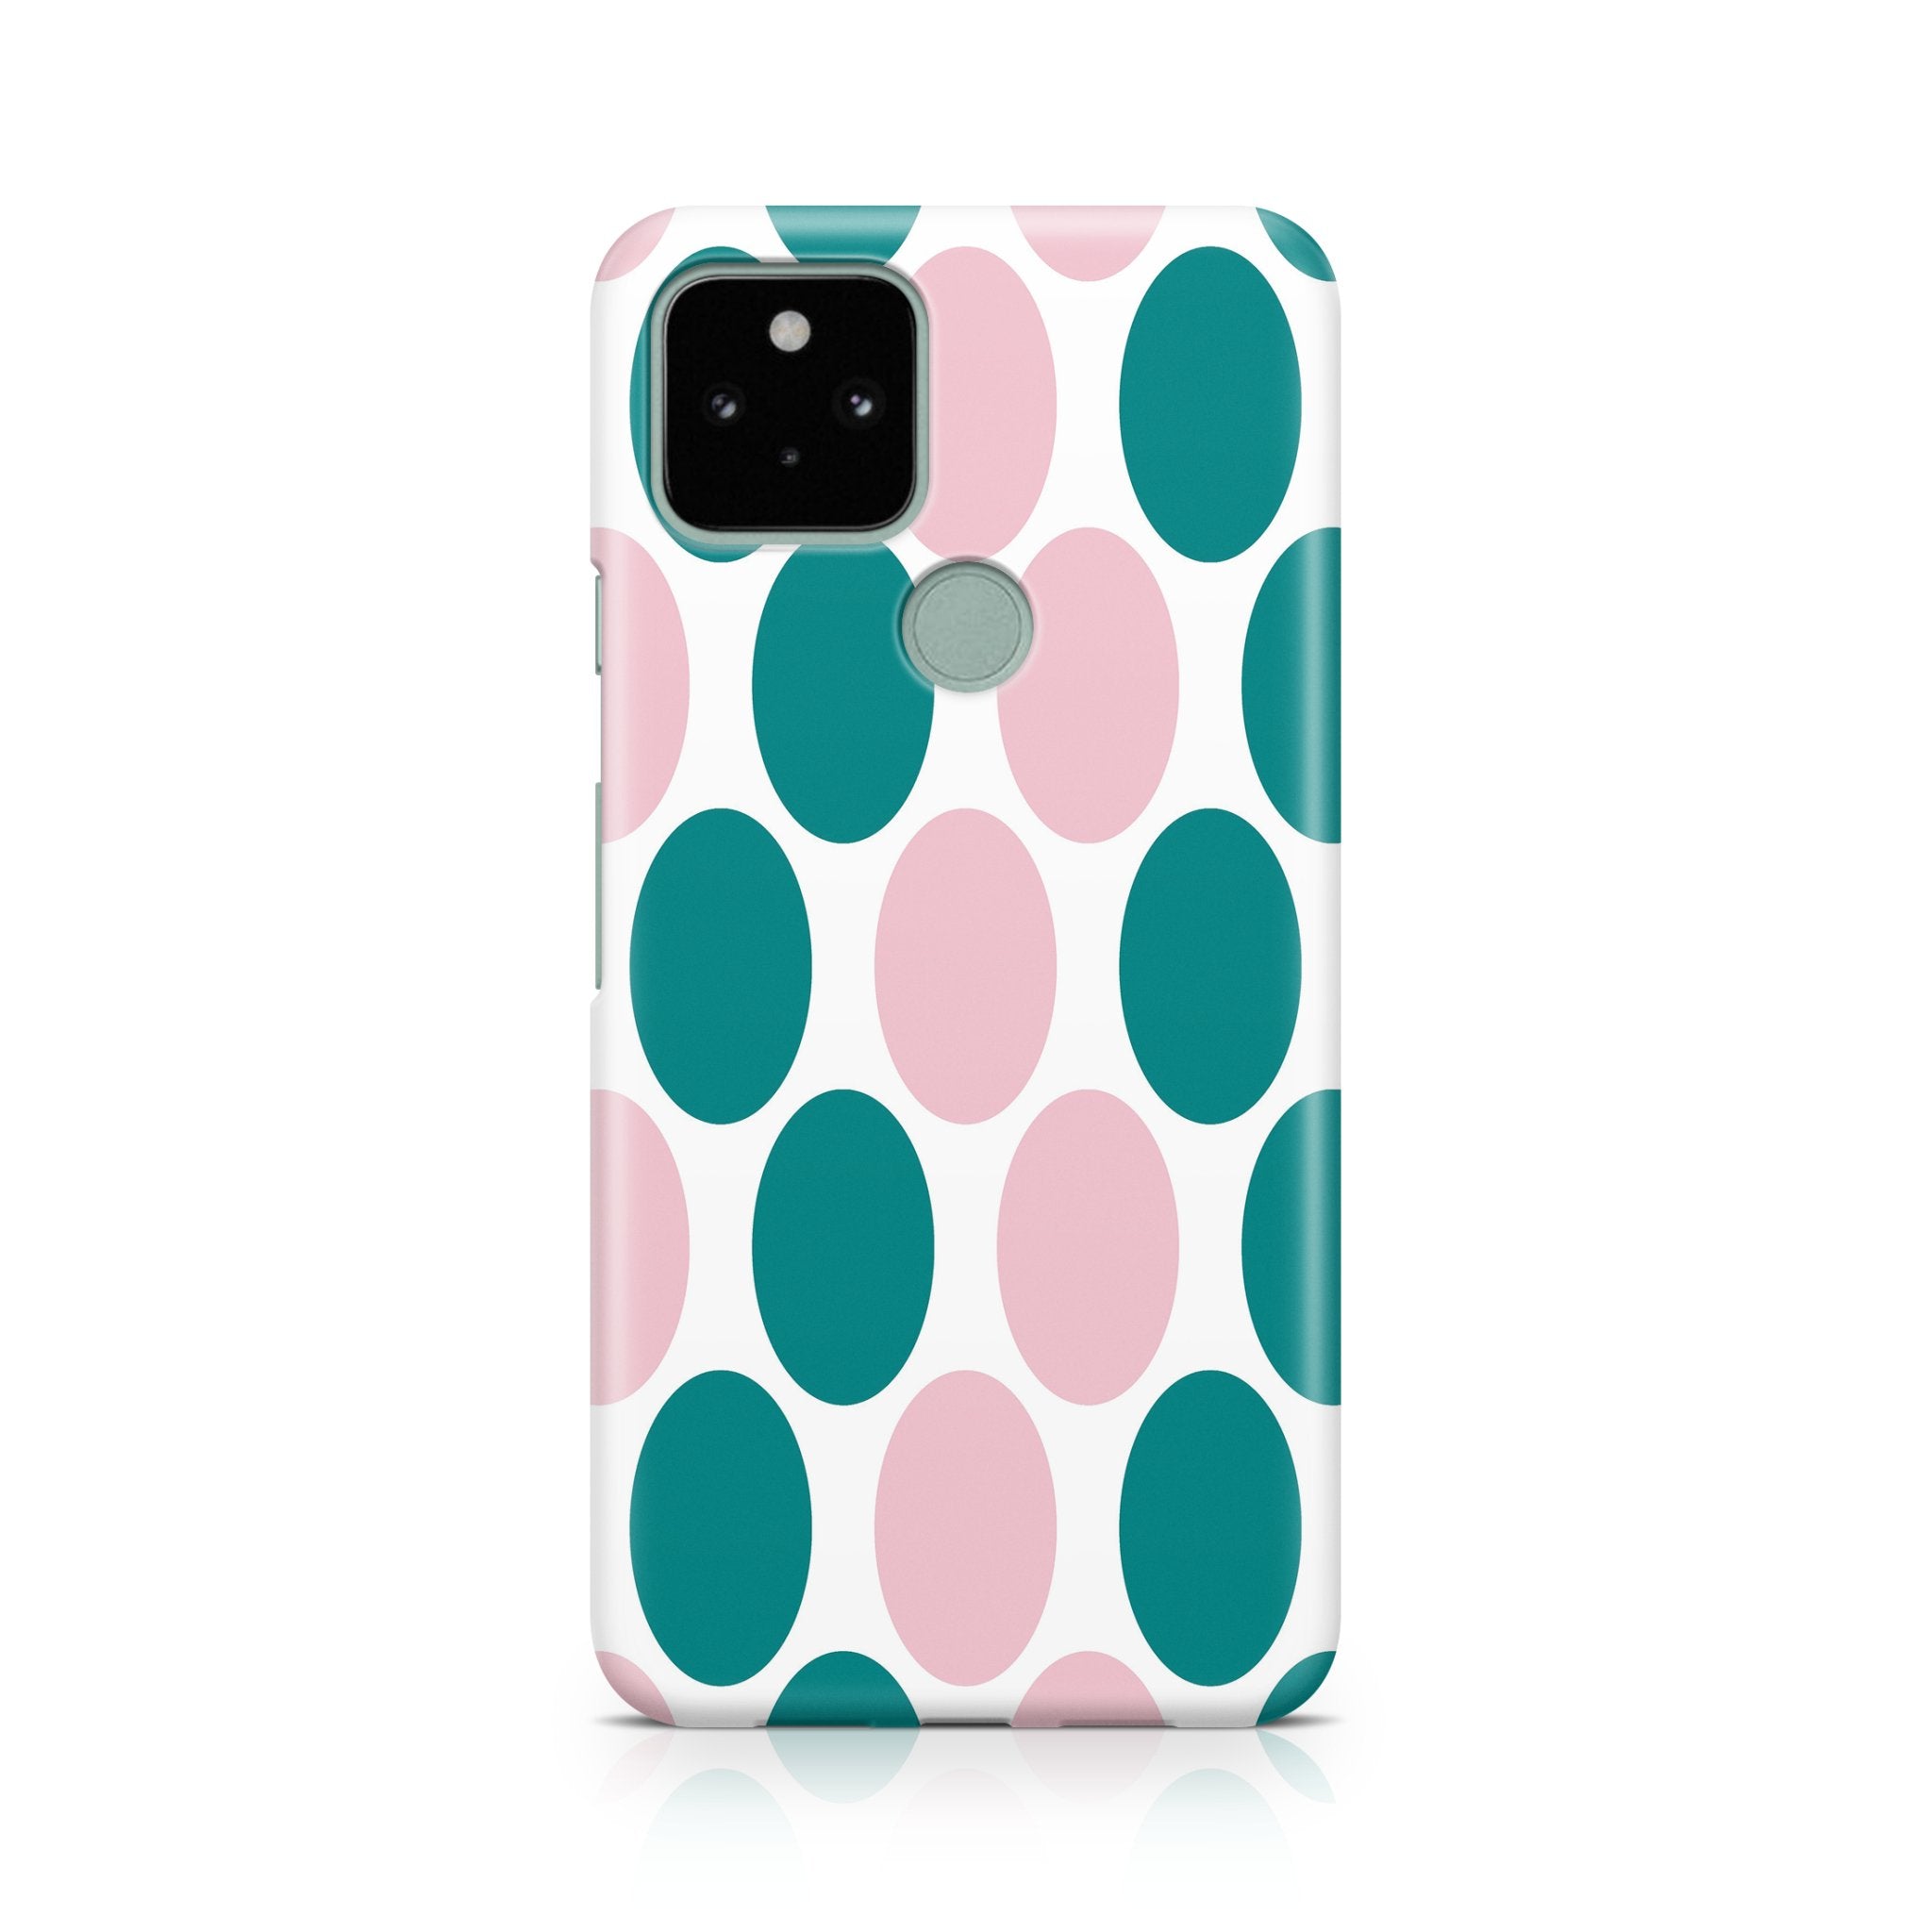 Whimsical Fusion - Google phone case designs by CaseSwagger